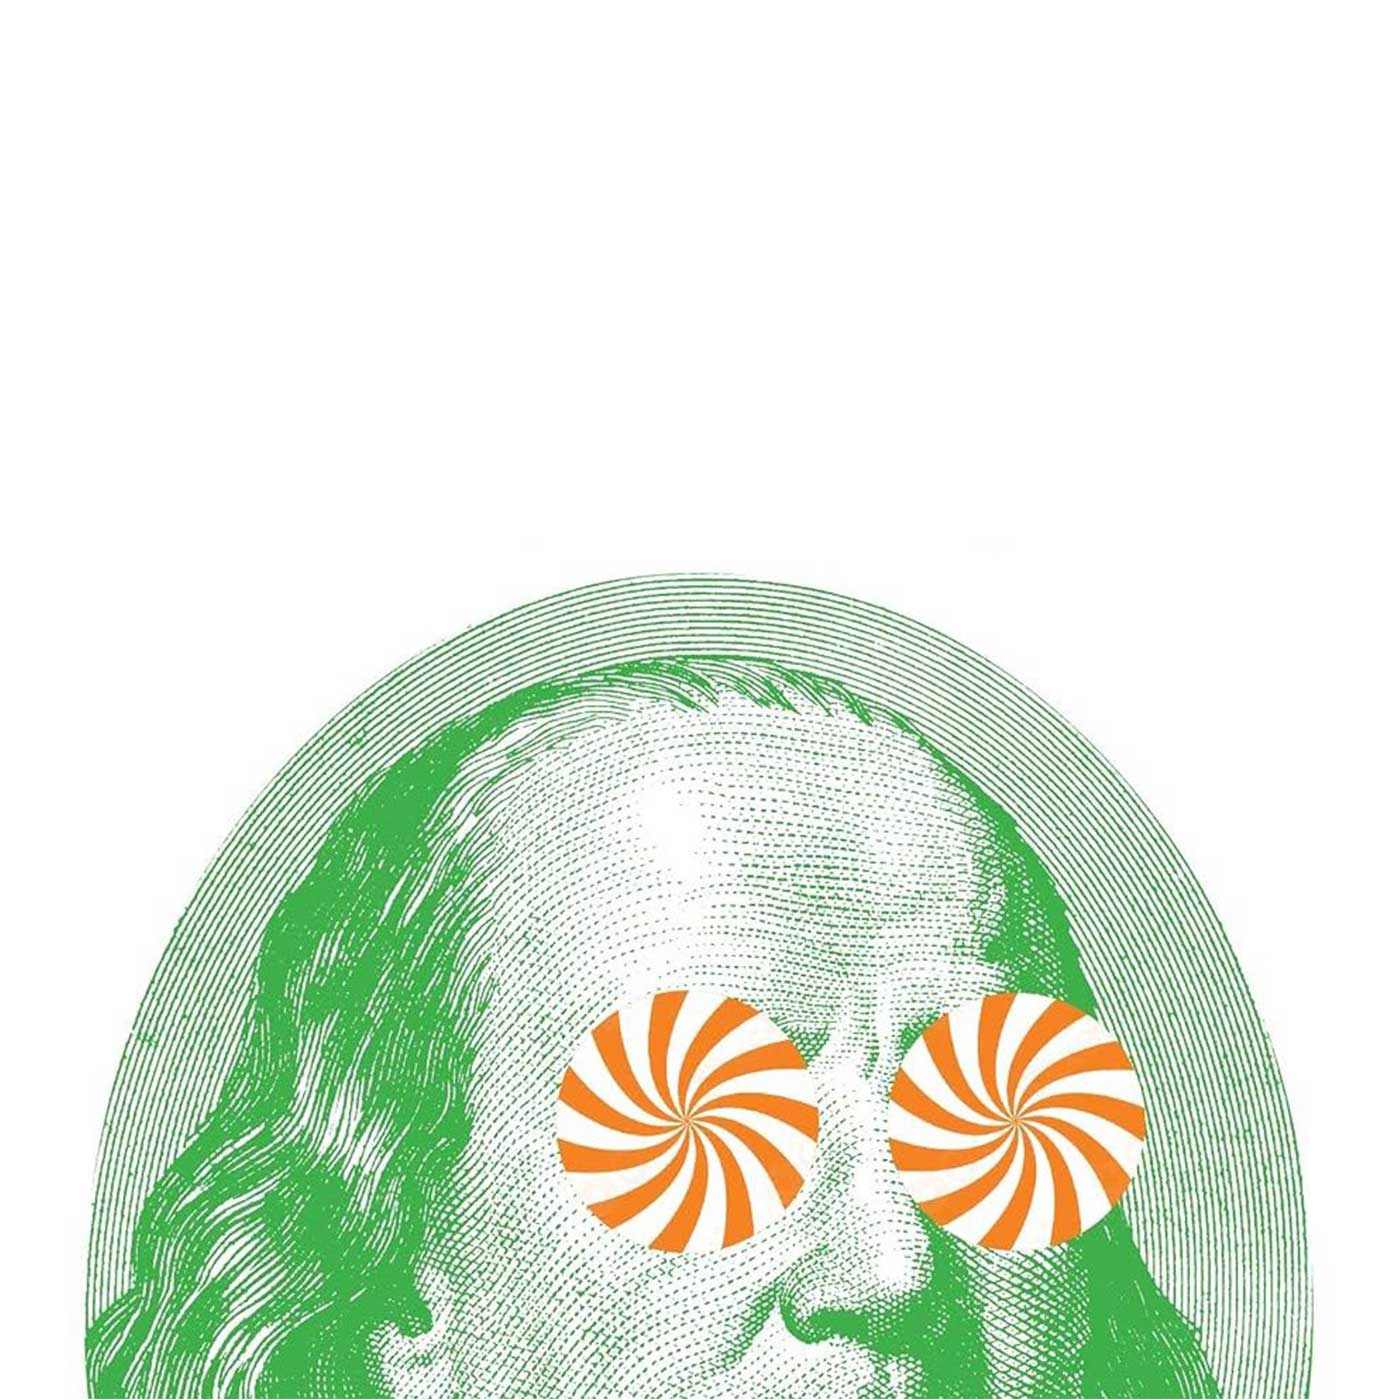 top part of Benjamin Franklin's head with swirl shapes over his eyes